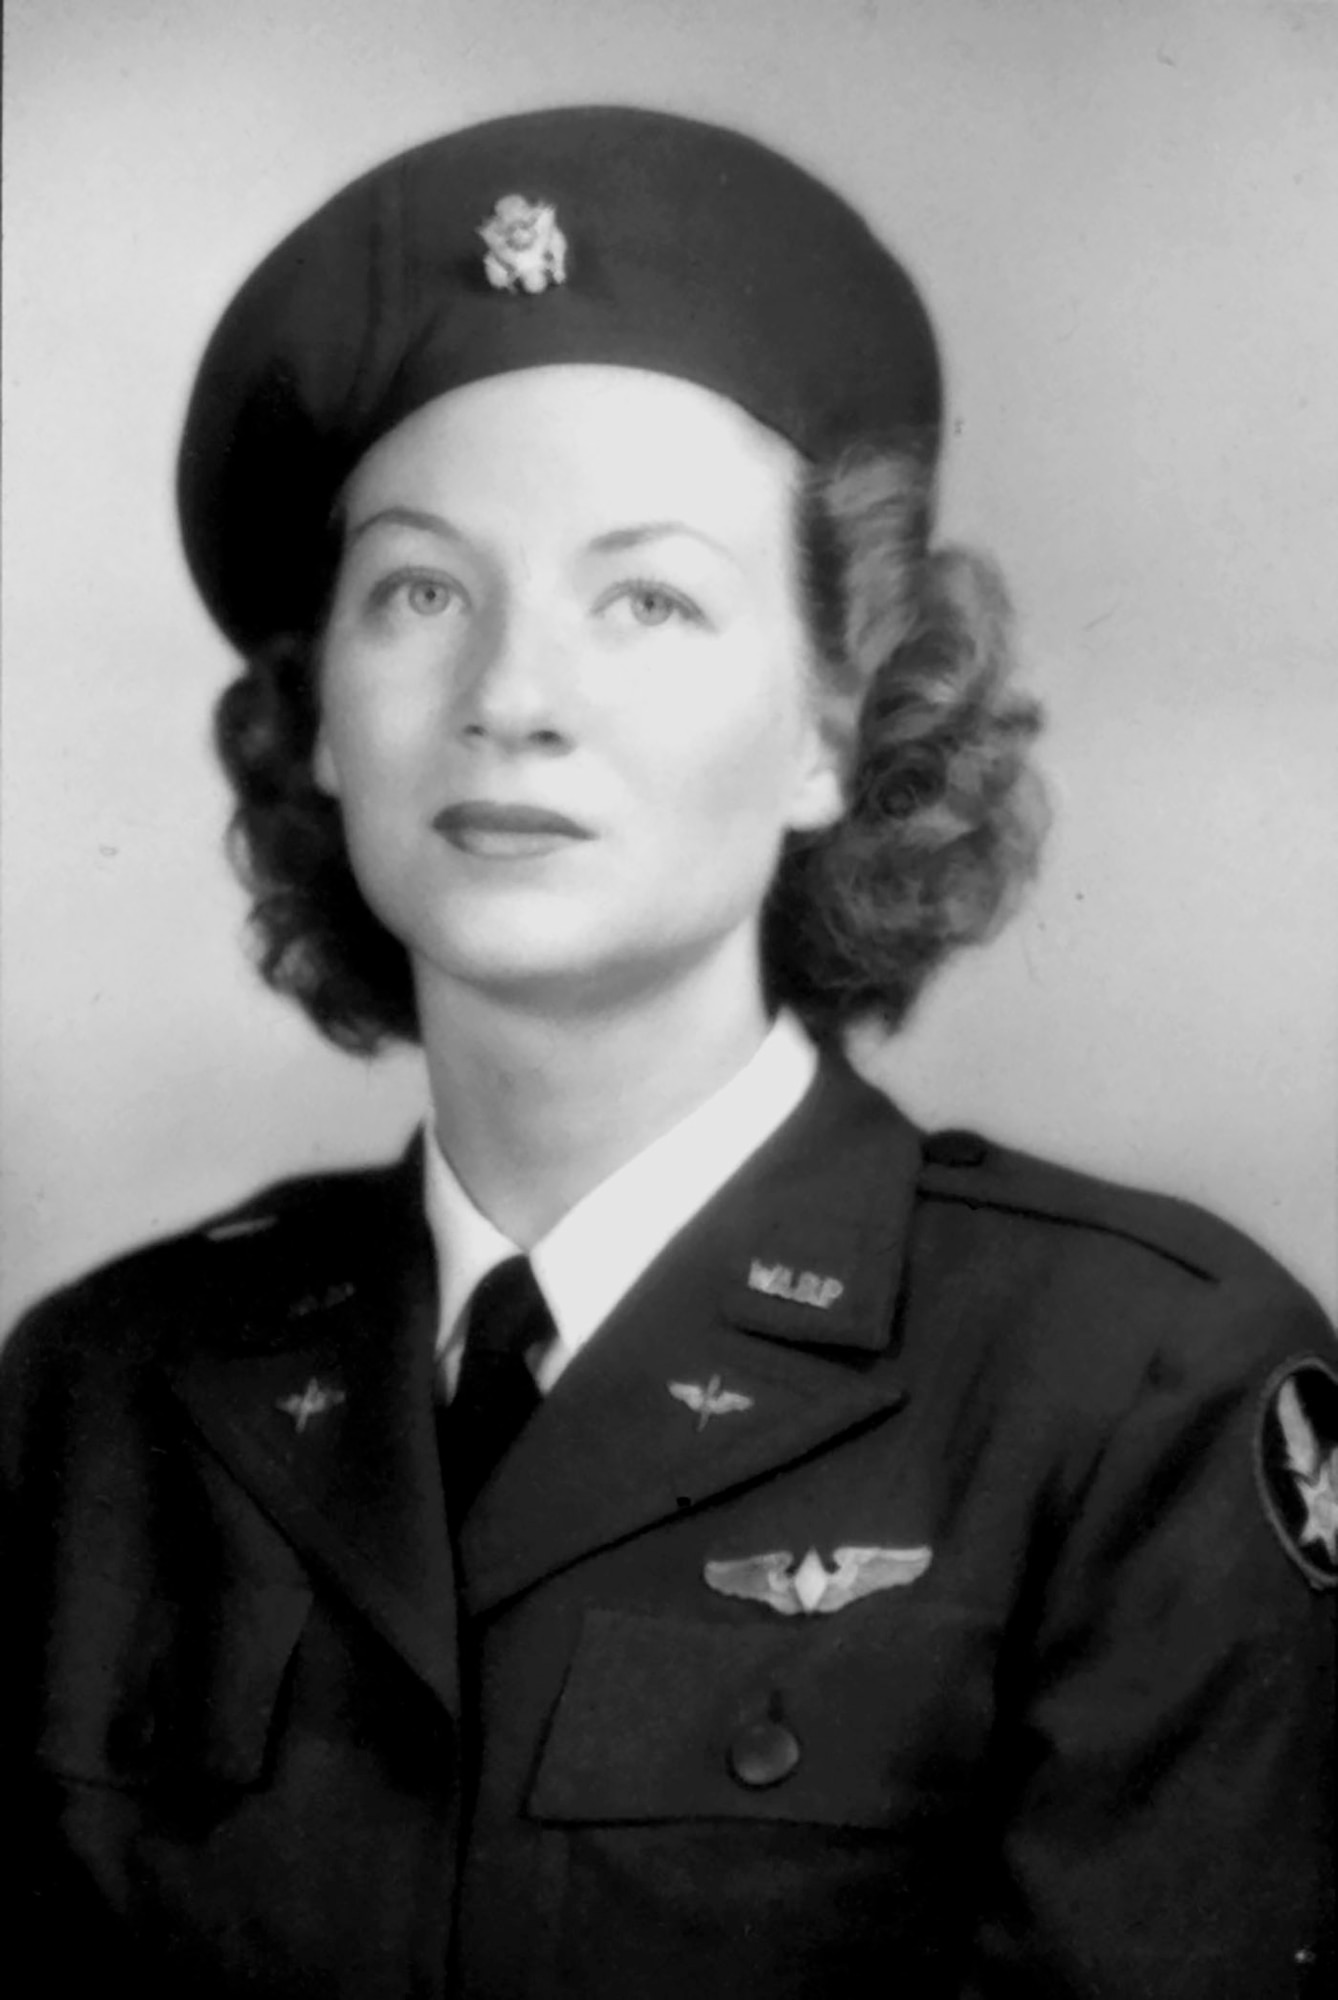 Marie Mountain, Women’s Air Force Service Pilot, completed U.S. Air Force pilot training during World War II and graduated in February 1944. Mountain accumulated approximately 1,000 flying hours in military aircraft, including the North American Aviation T-6 and BT-13 Valiant training aircraft, and as a co-pilot in the B-17 Flying Fortress and B-26 Marauder bomber aircraft. She met 1st Lt. John A. Clark, a trainee pilot in the U.S. Air Force, in Las Vegas in 1944, and the couple later married in July 1945. After 63 years together, Marie passed away in 2008. Now a 100th Bomb Group veteran and World War II survivor, Clark attended the 100th BG reunion and shared stories about Marie and the WASPs pioneering work that paved the way for women flying today in all branches of the military. (Courtesy photo from John A. Clark and 100th Bomb Group Foundation)